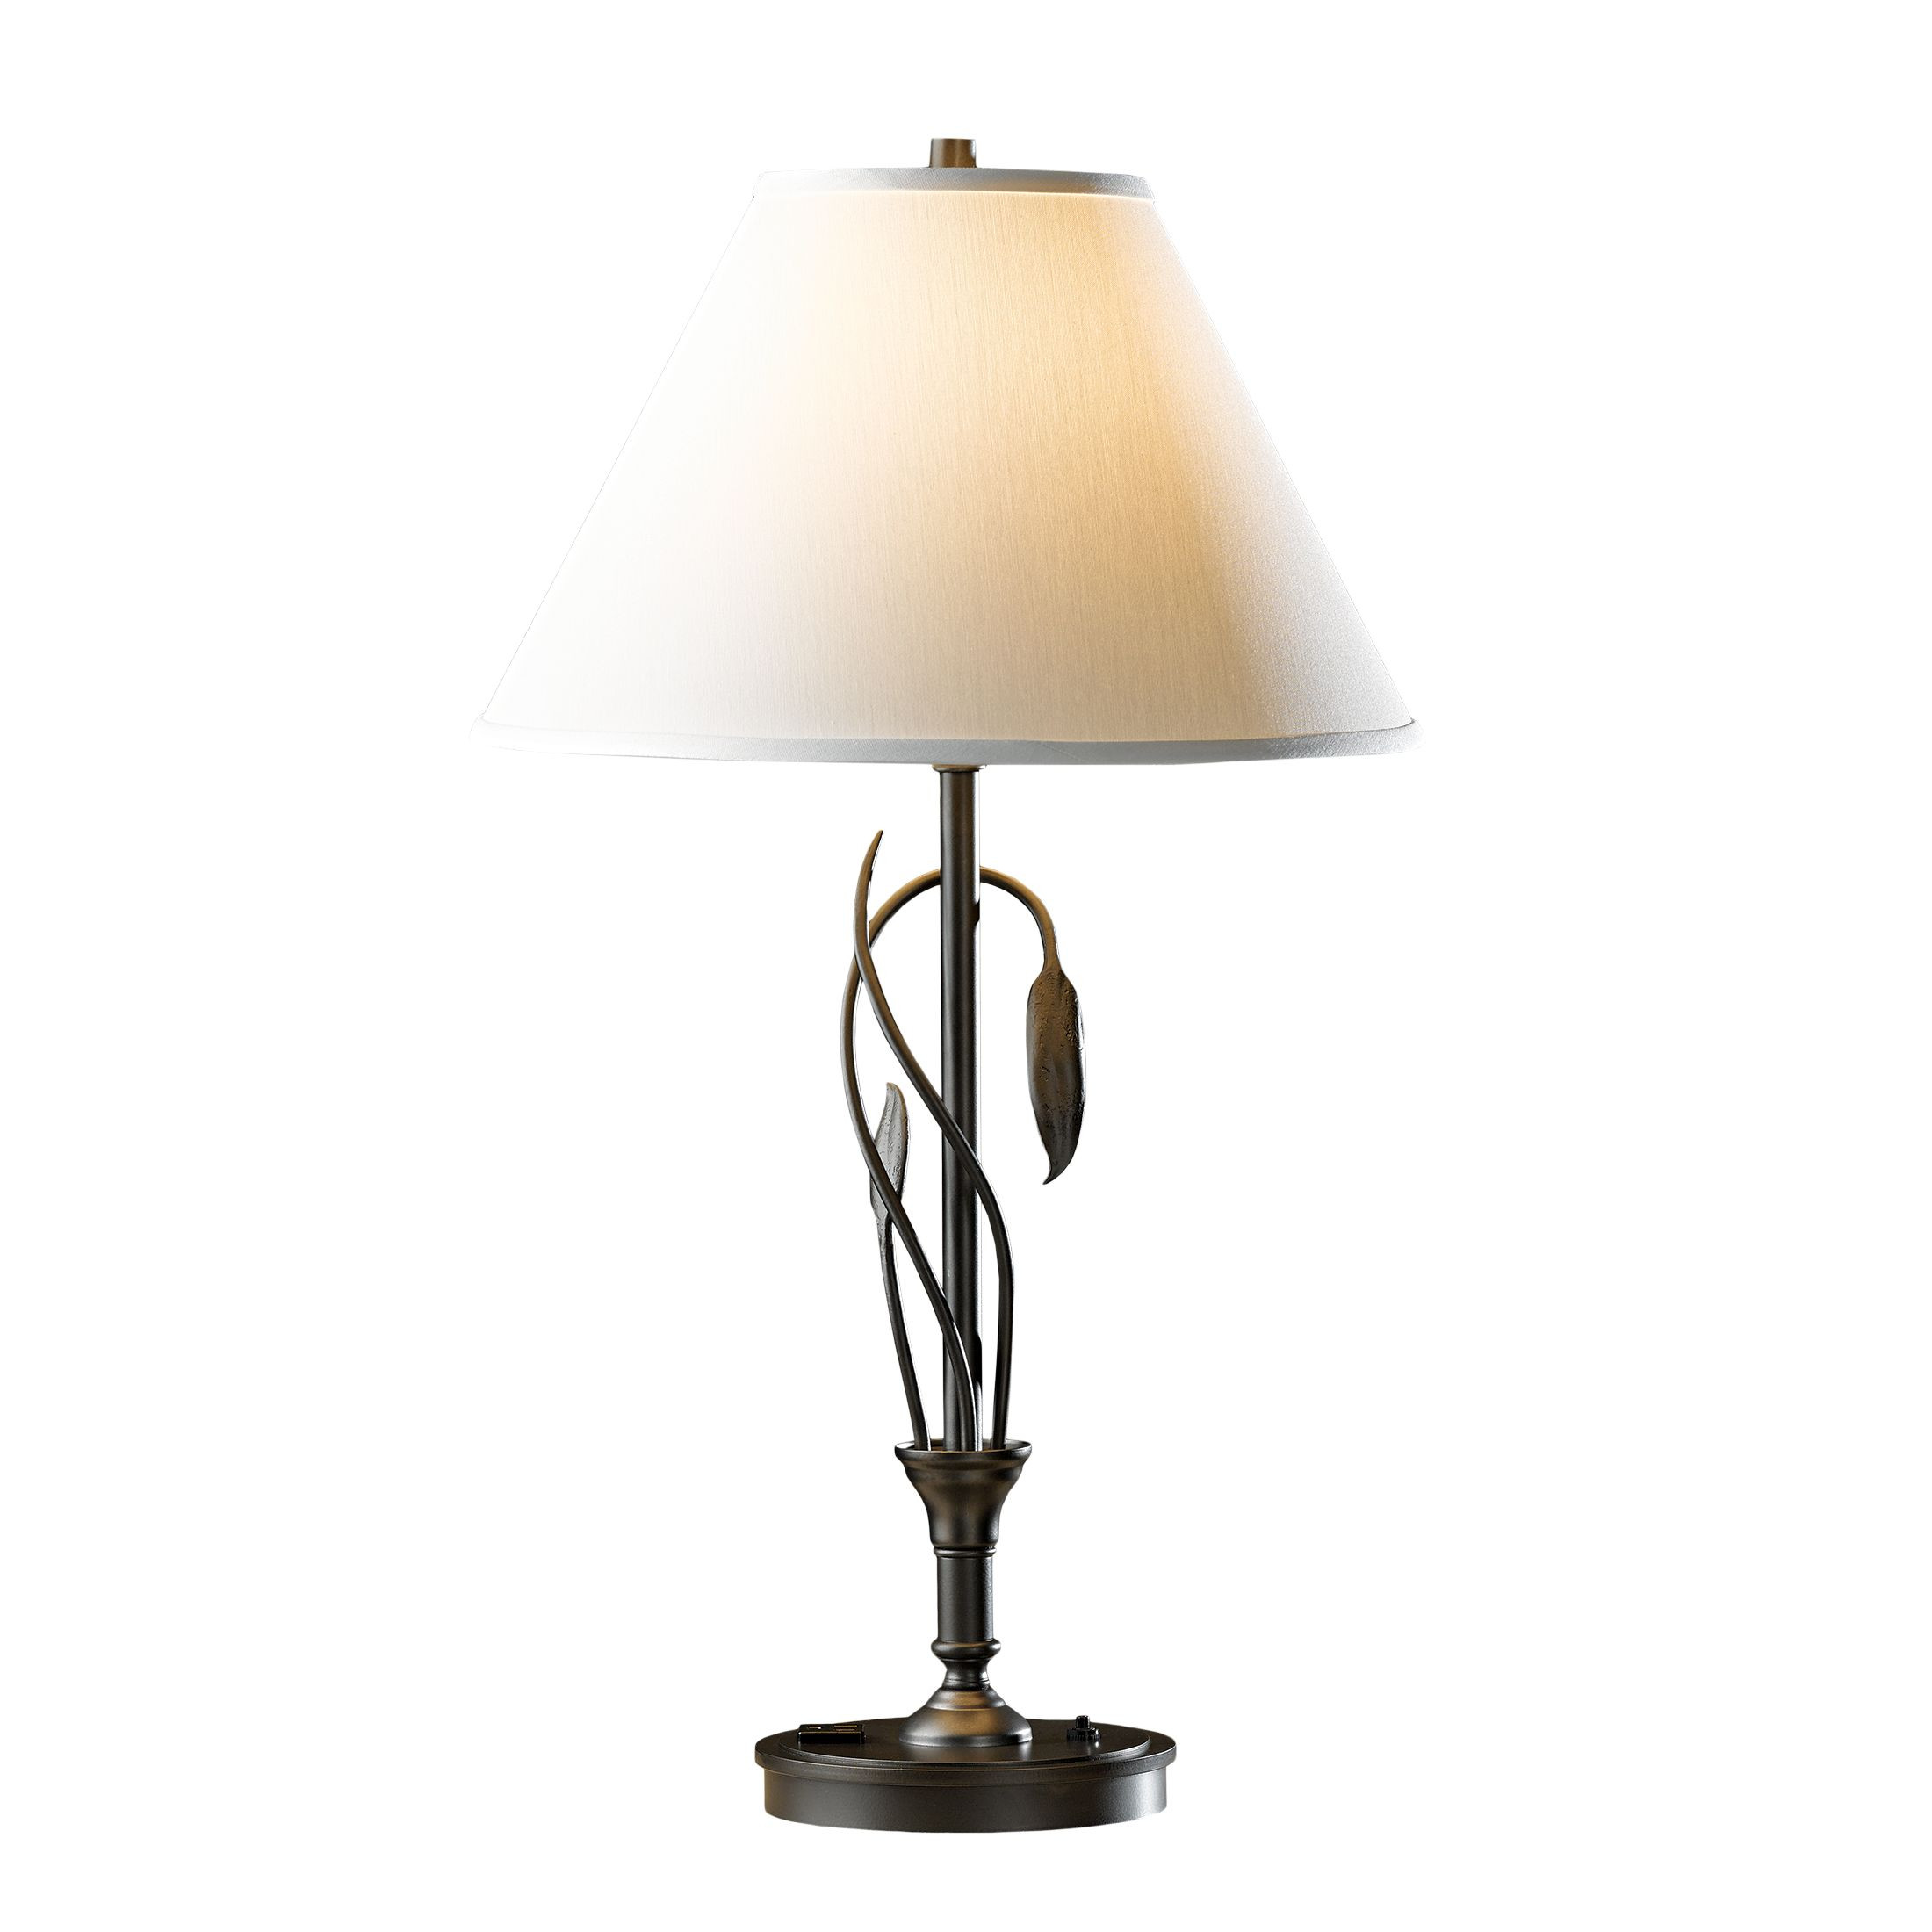 26 attractive Long Floor Vases Online India 2024 free download long floor vases online india of forged leaves and vase table lamp hubbardton forge for product detail forged leaves and vase table lamp